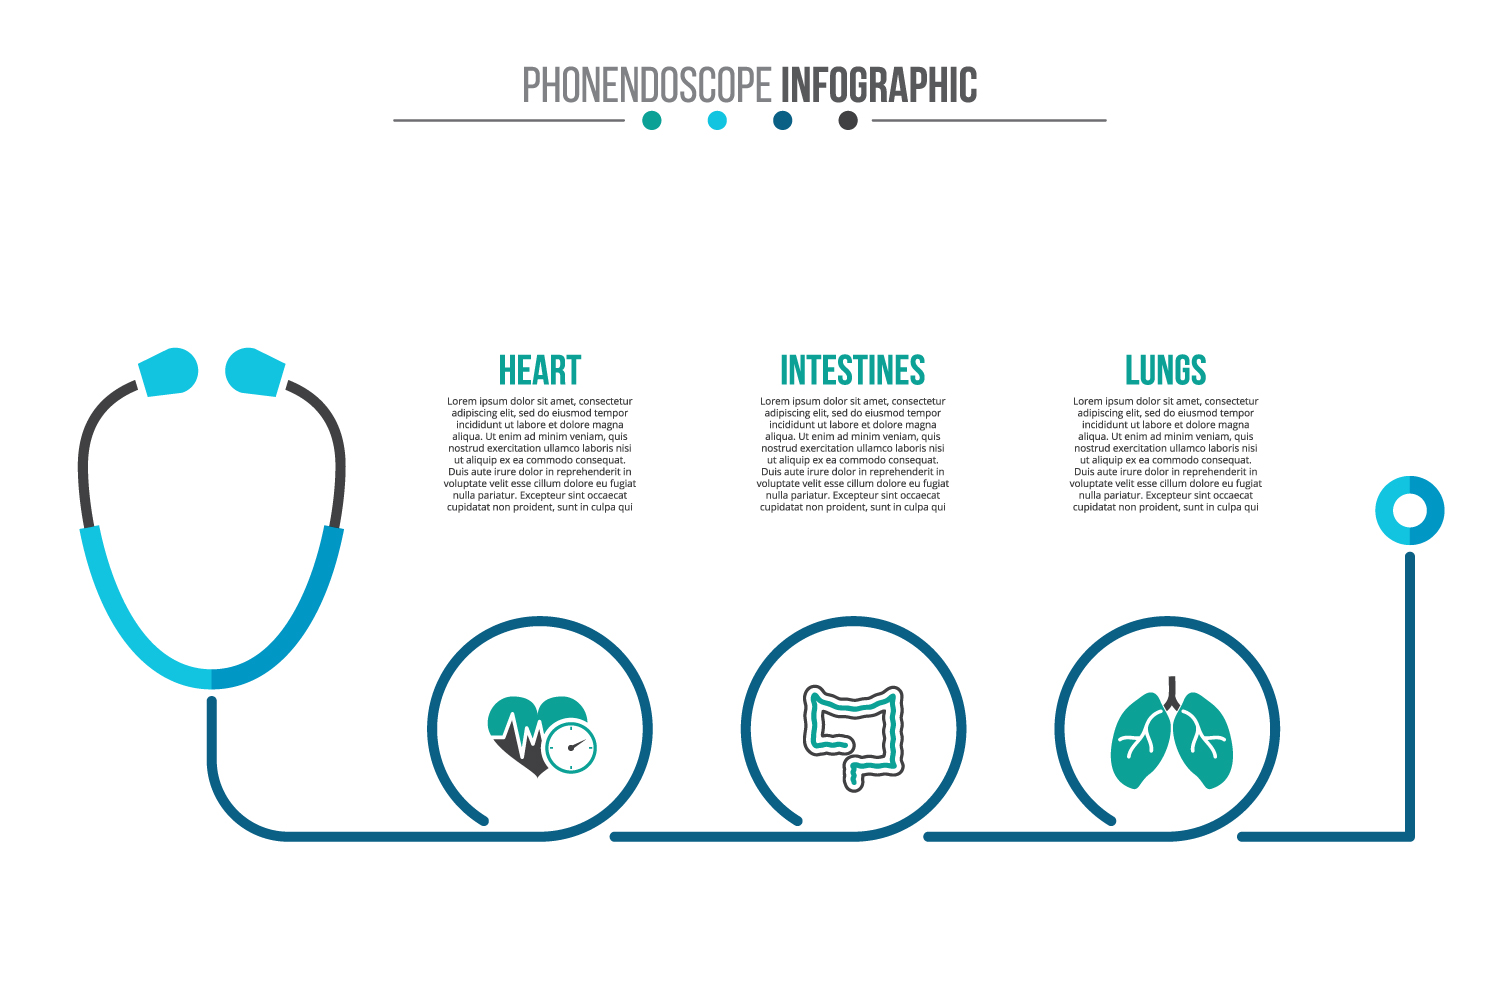 infographic medical template